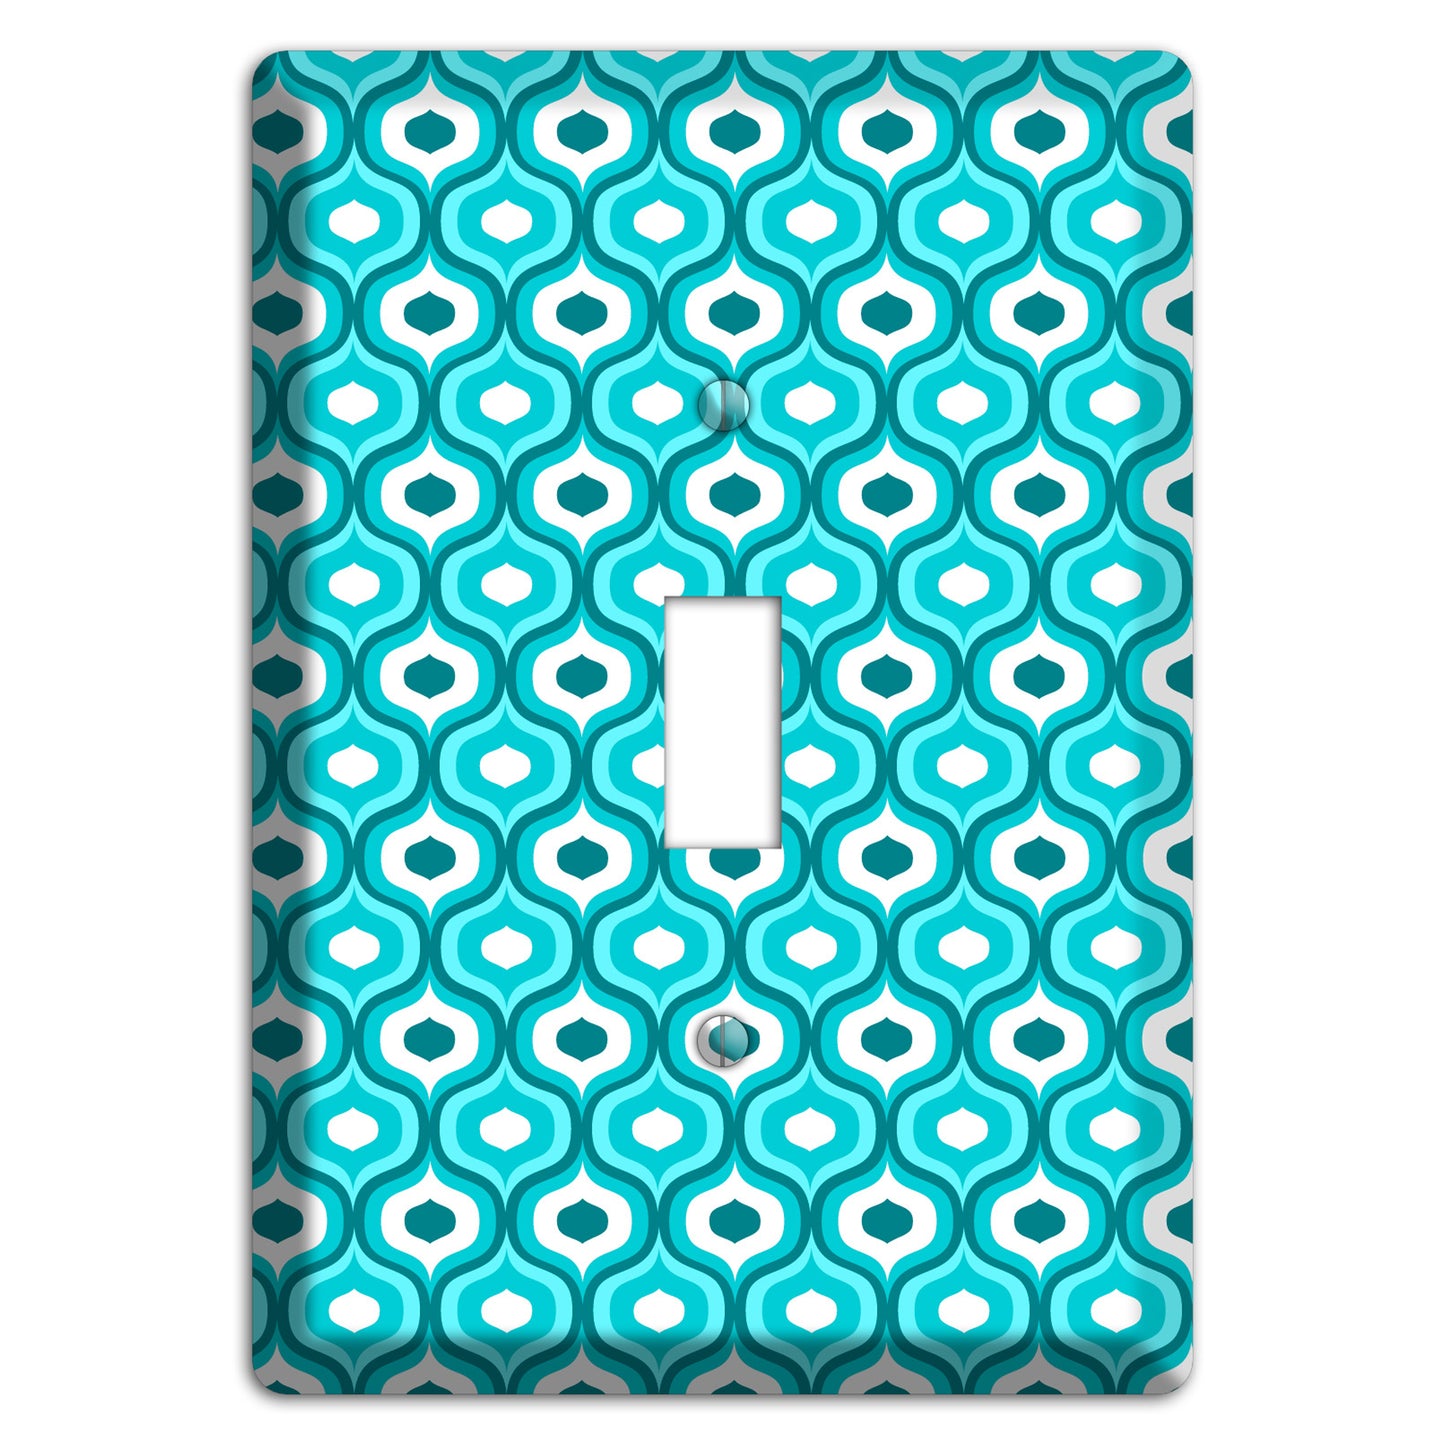 Multi Turquoise Double Scallop Cover Plates